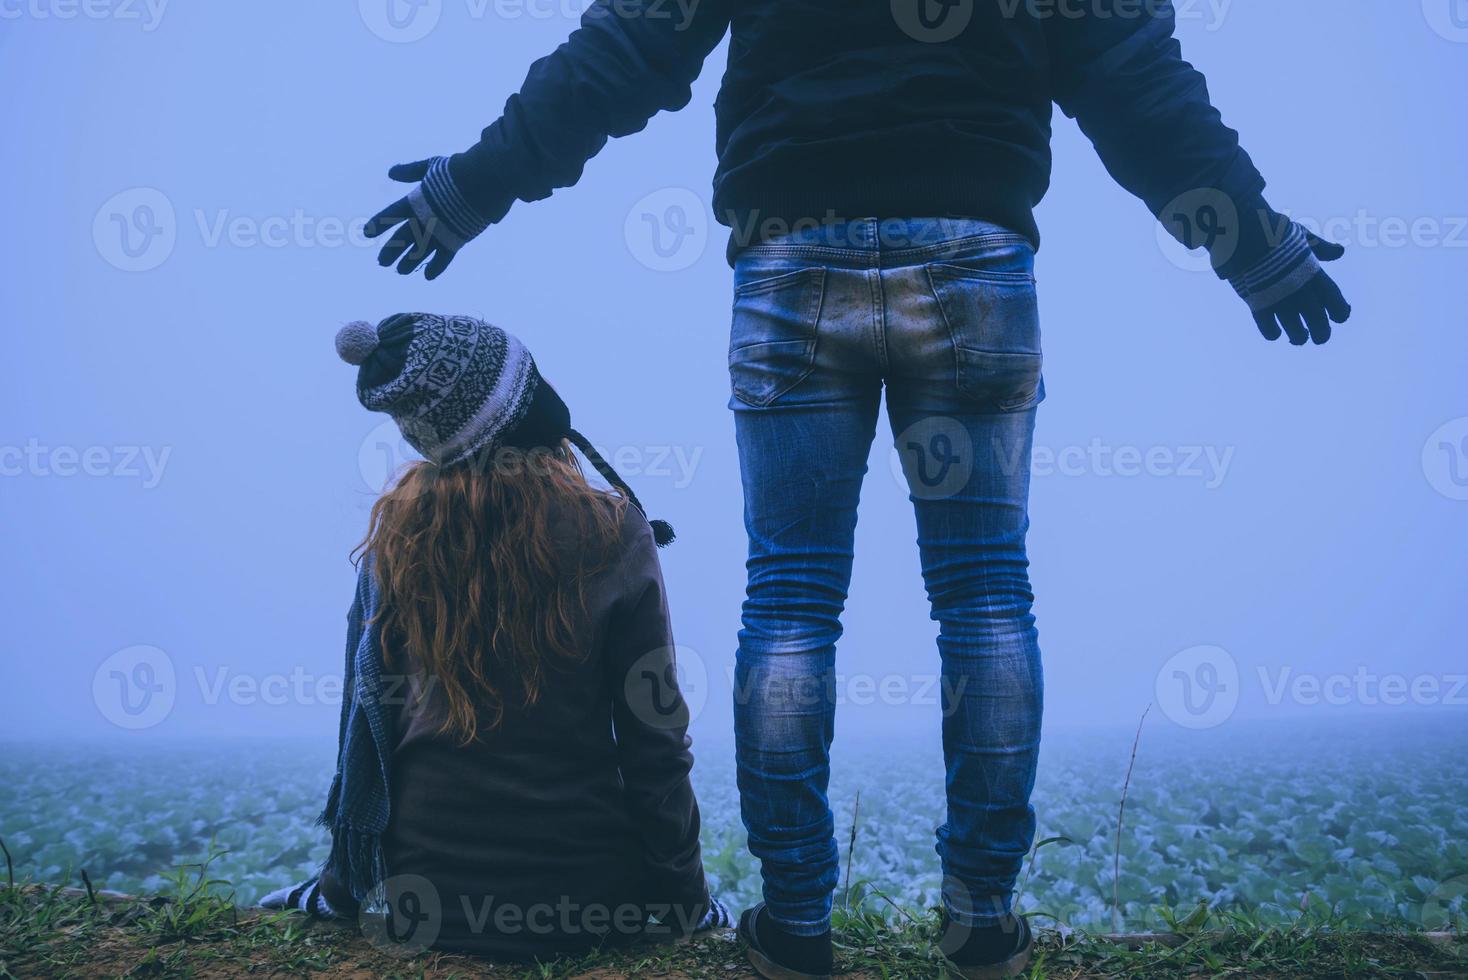 Lover women and men asians travel relax in the holiday. Happy to travel in the holiday. Lovers walk hand in hand on rice field. During the foggy winter photo